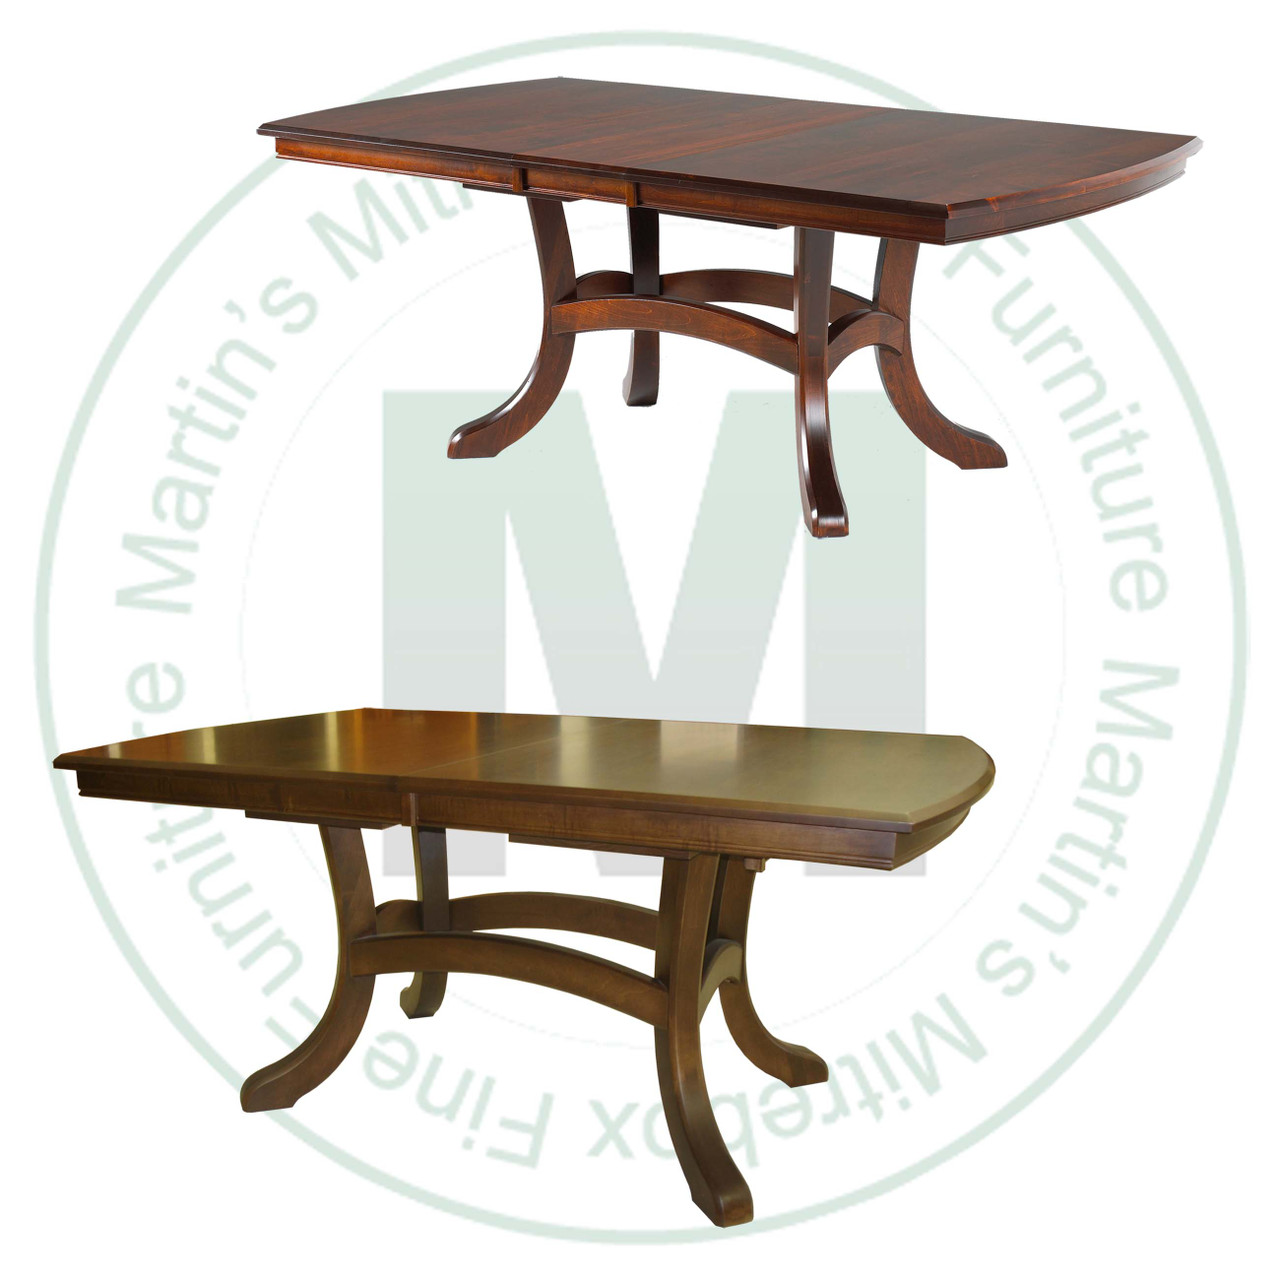 Oak Jordan Double Pedestal Table 42''D x 66''W x 30''H With 3 - 12'' Leaves. Table Has 1'' Thick Top